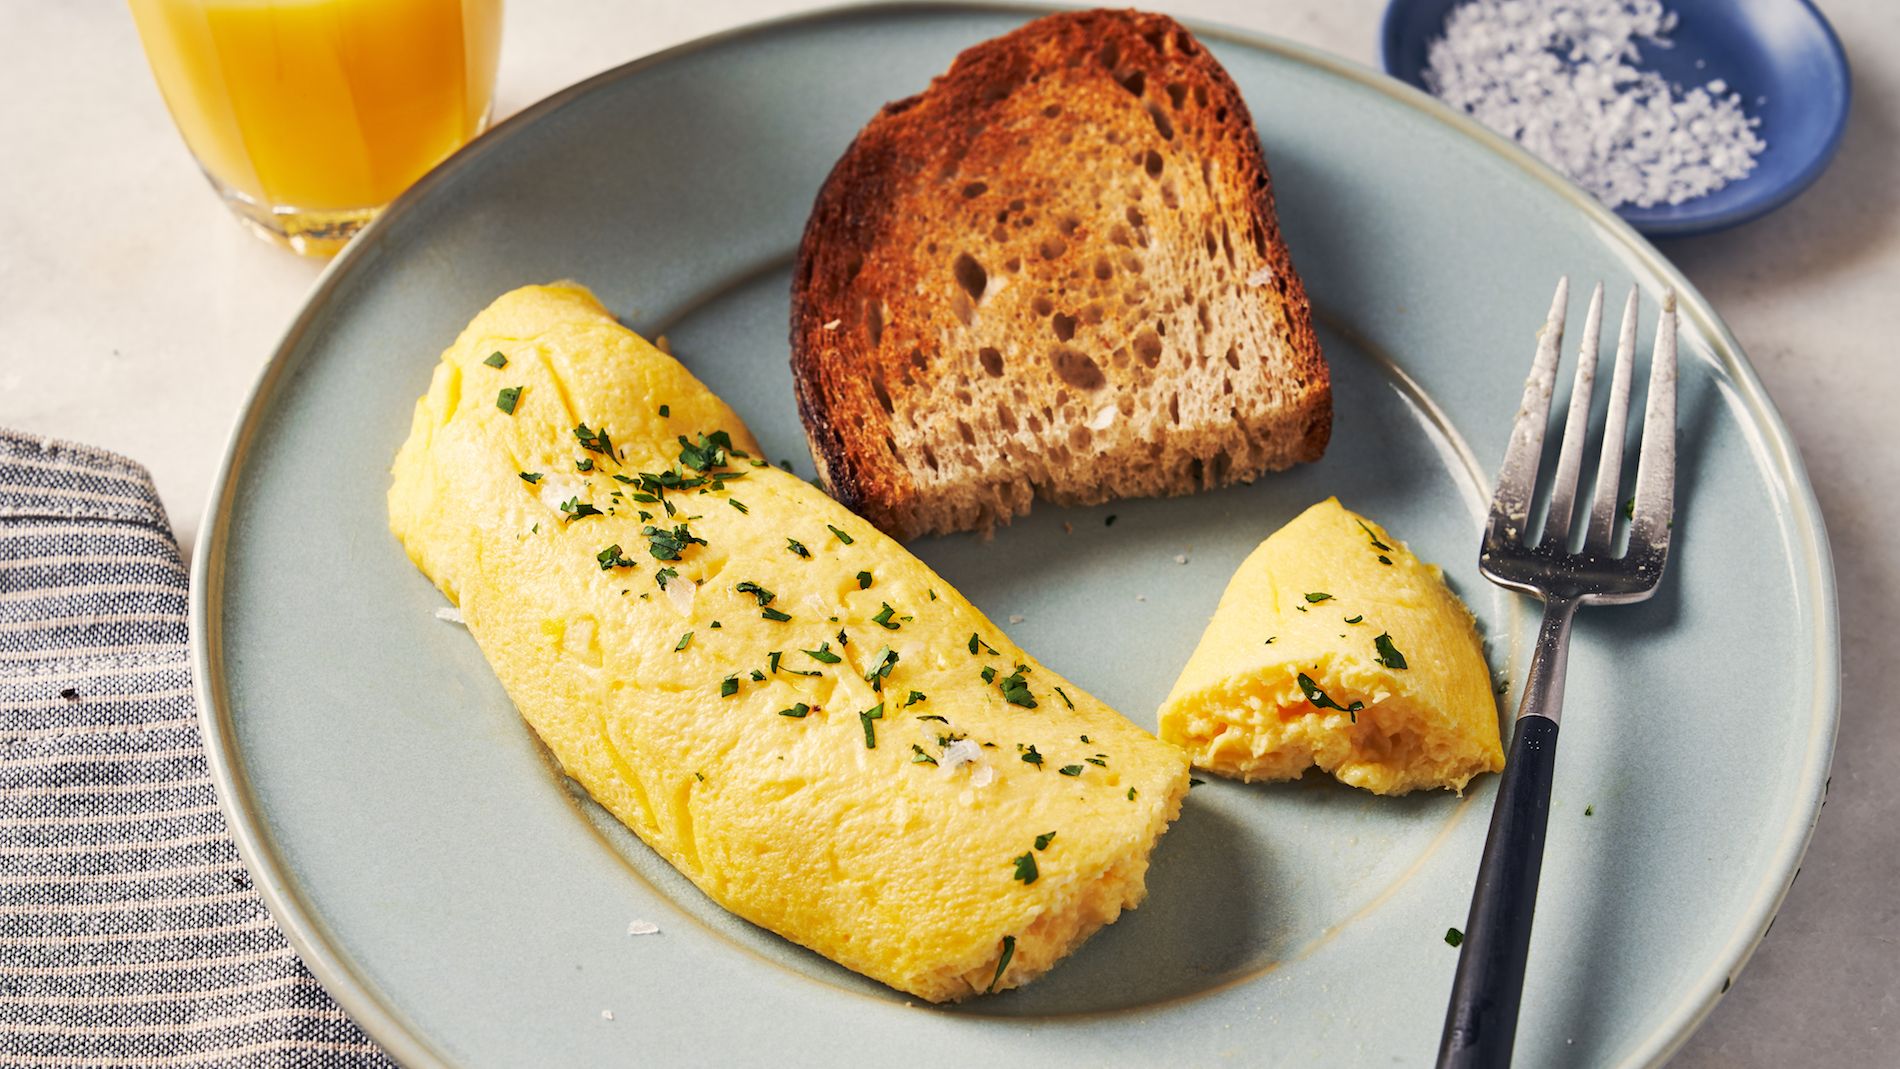 How To Make a French Omelette - Step-by-Step Recipe